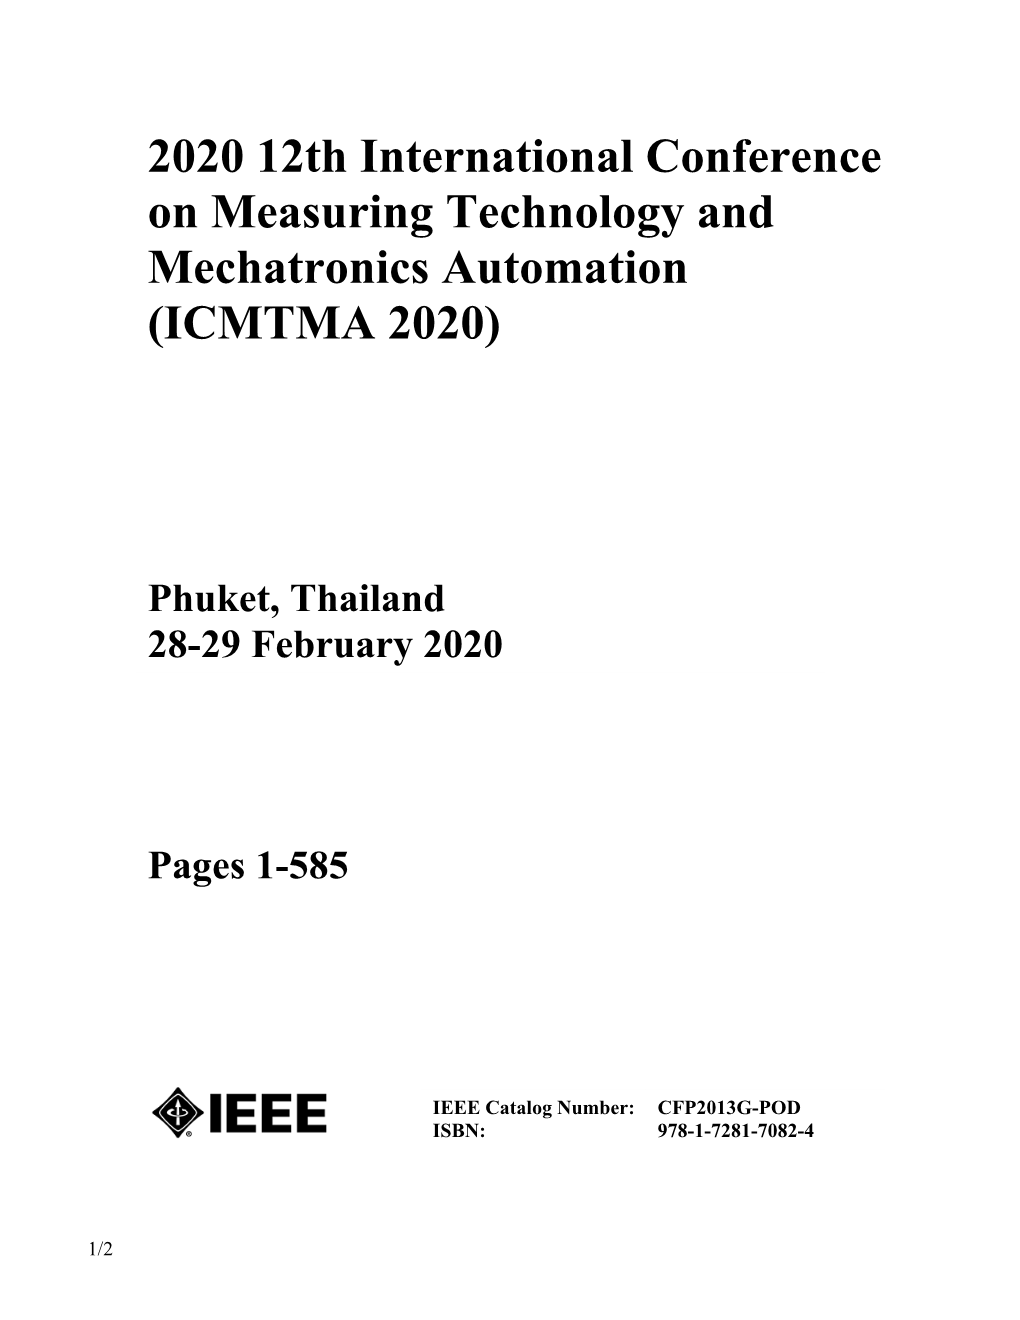 2020 12Th International Conference on Measuring Technology and Mechatronics Automation ( ICMTMA 2020)